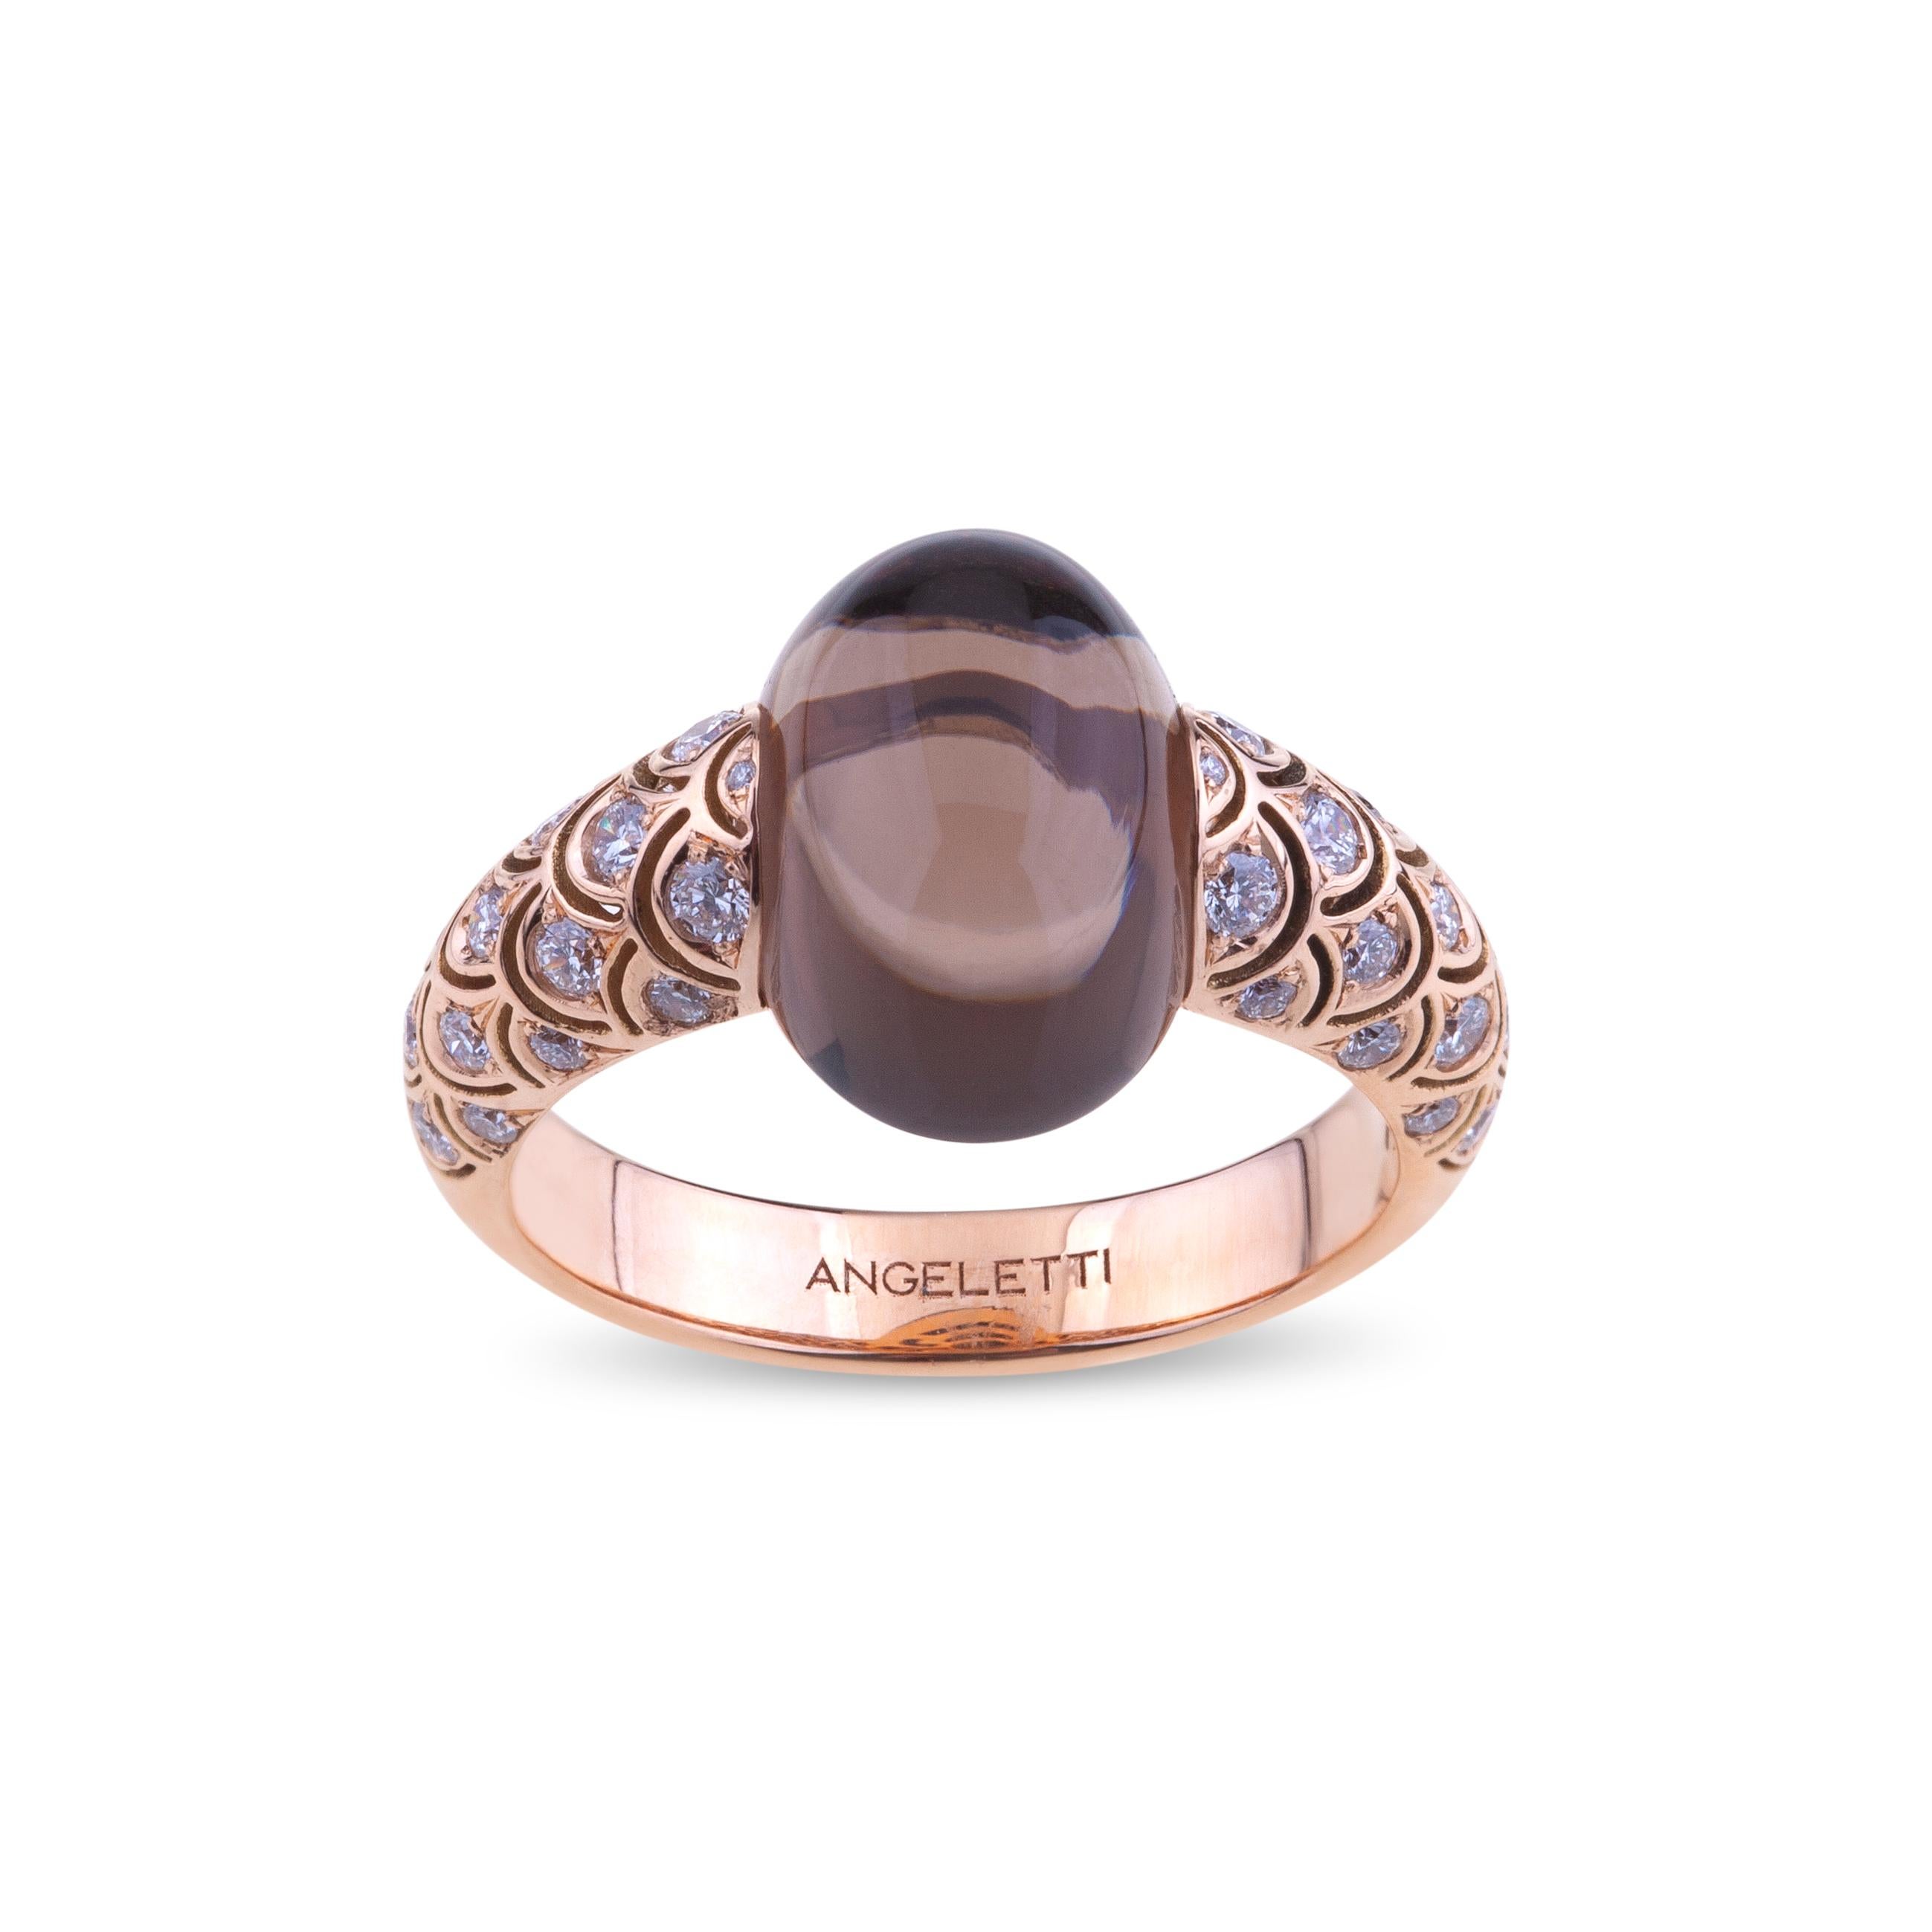 Angeletti Embrace Rose Gold With Diamonds and Cabochon Smoky Quarz Cocktail Ring.
New Wave Version, Designed and Manifactured in Rome. Available in Different Size.
Gold Weight is Around 5 Grams and the Size is 13 but Very Confortable for a range of